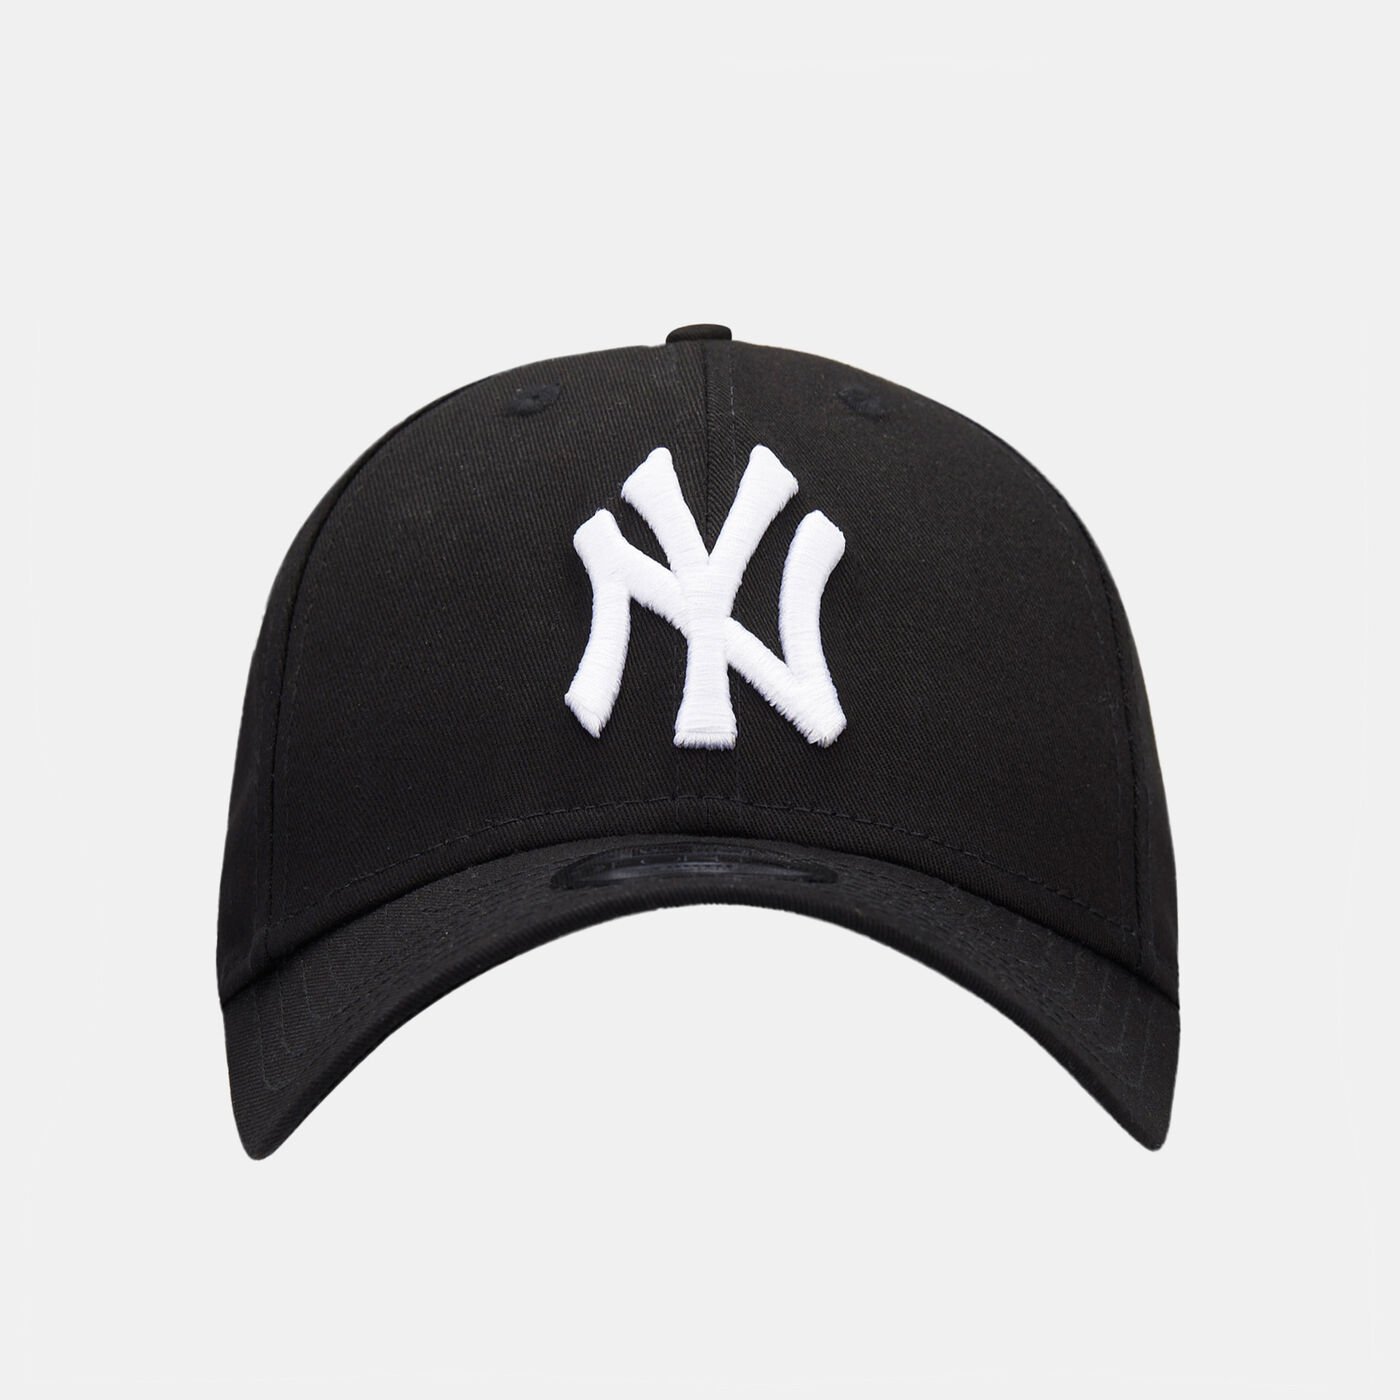 Kids' MLB New York Yankees 9FORTY Cap (Younger Kids)